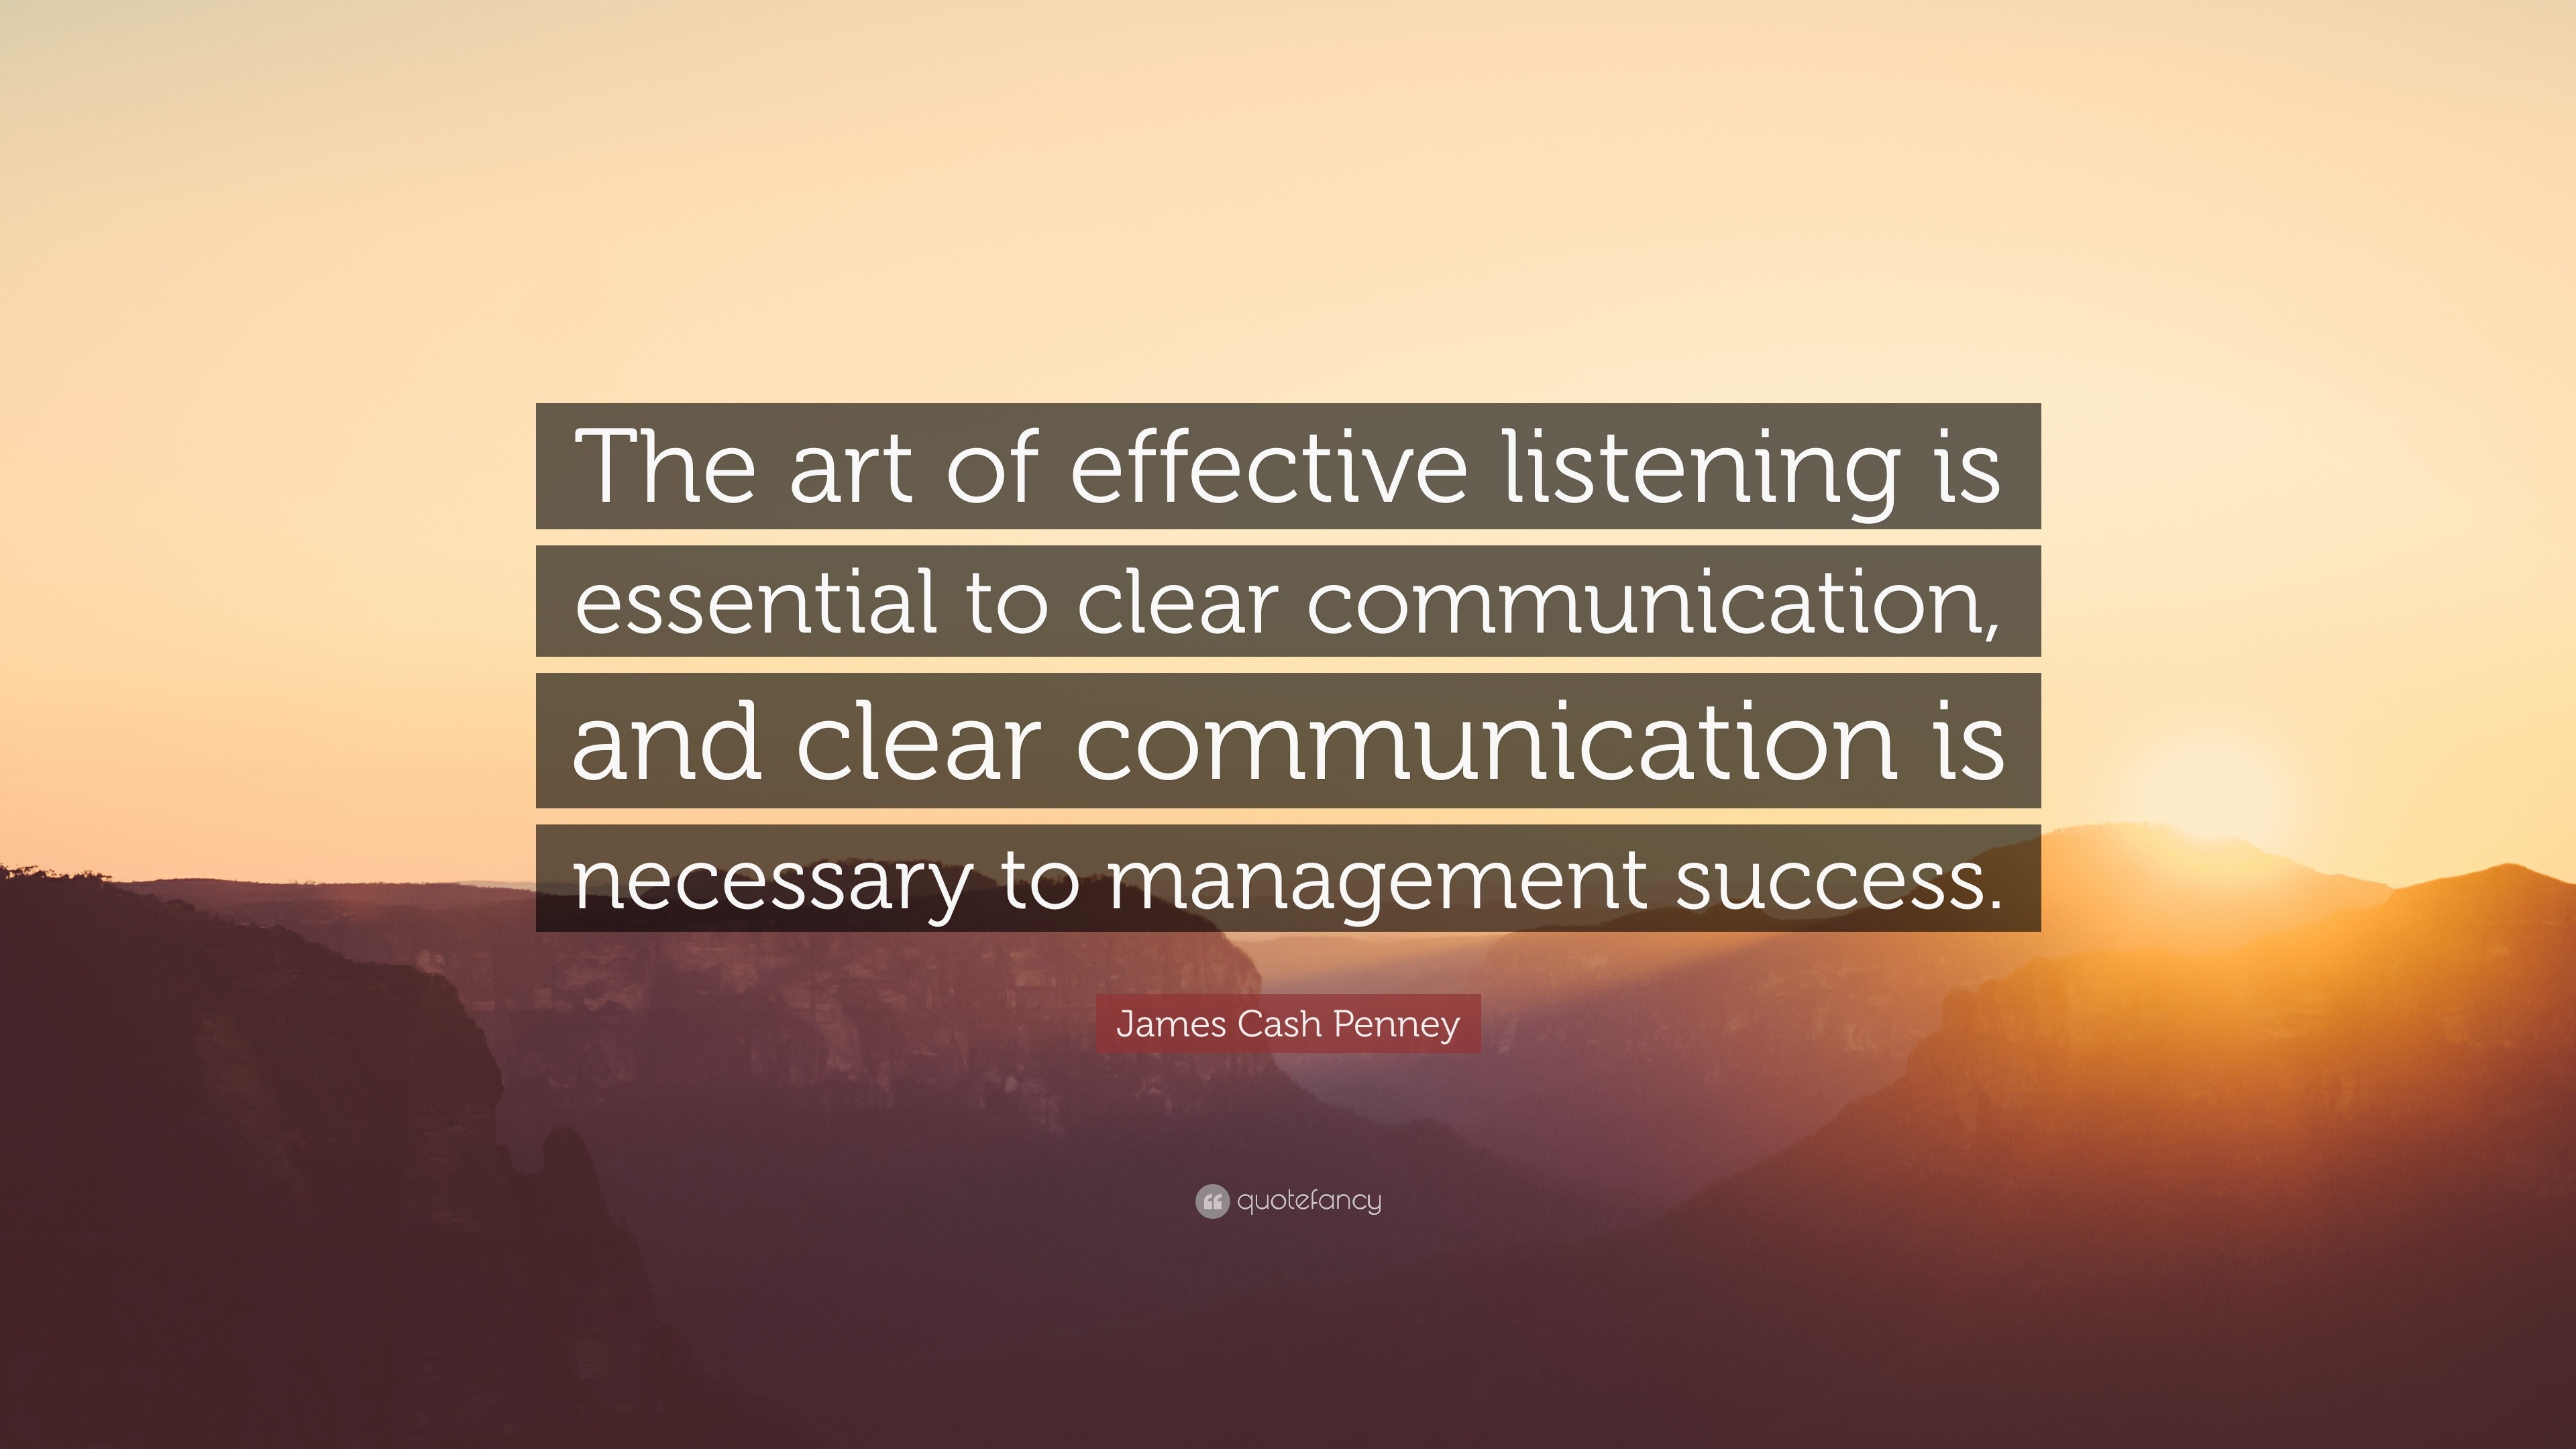 Quotes about listening - pointsfiln